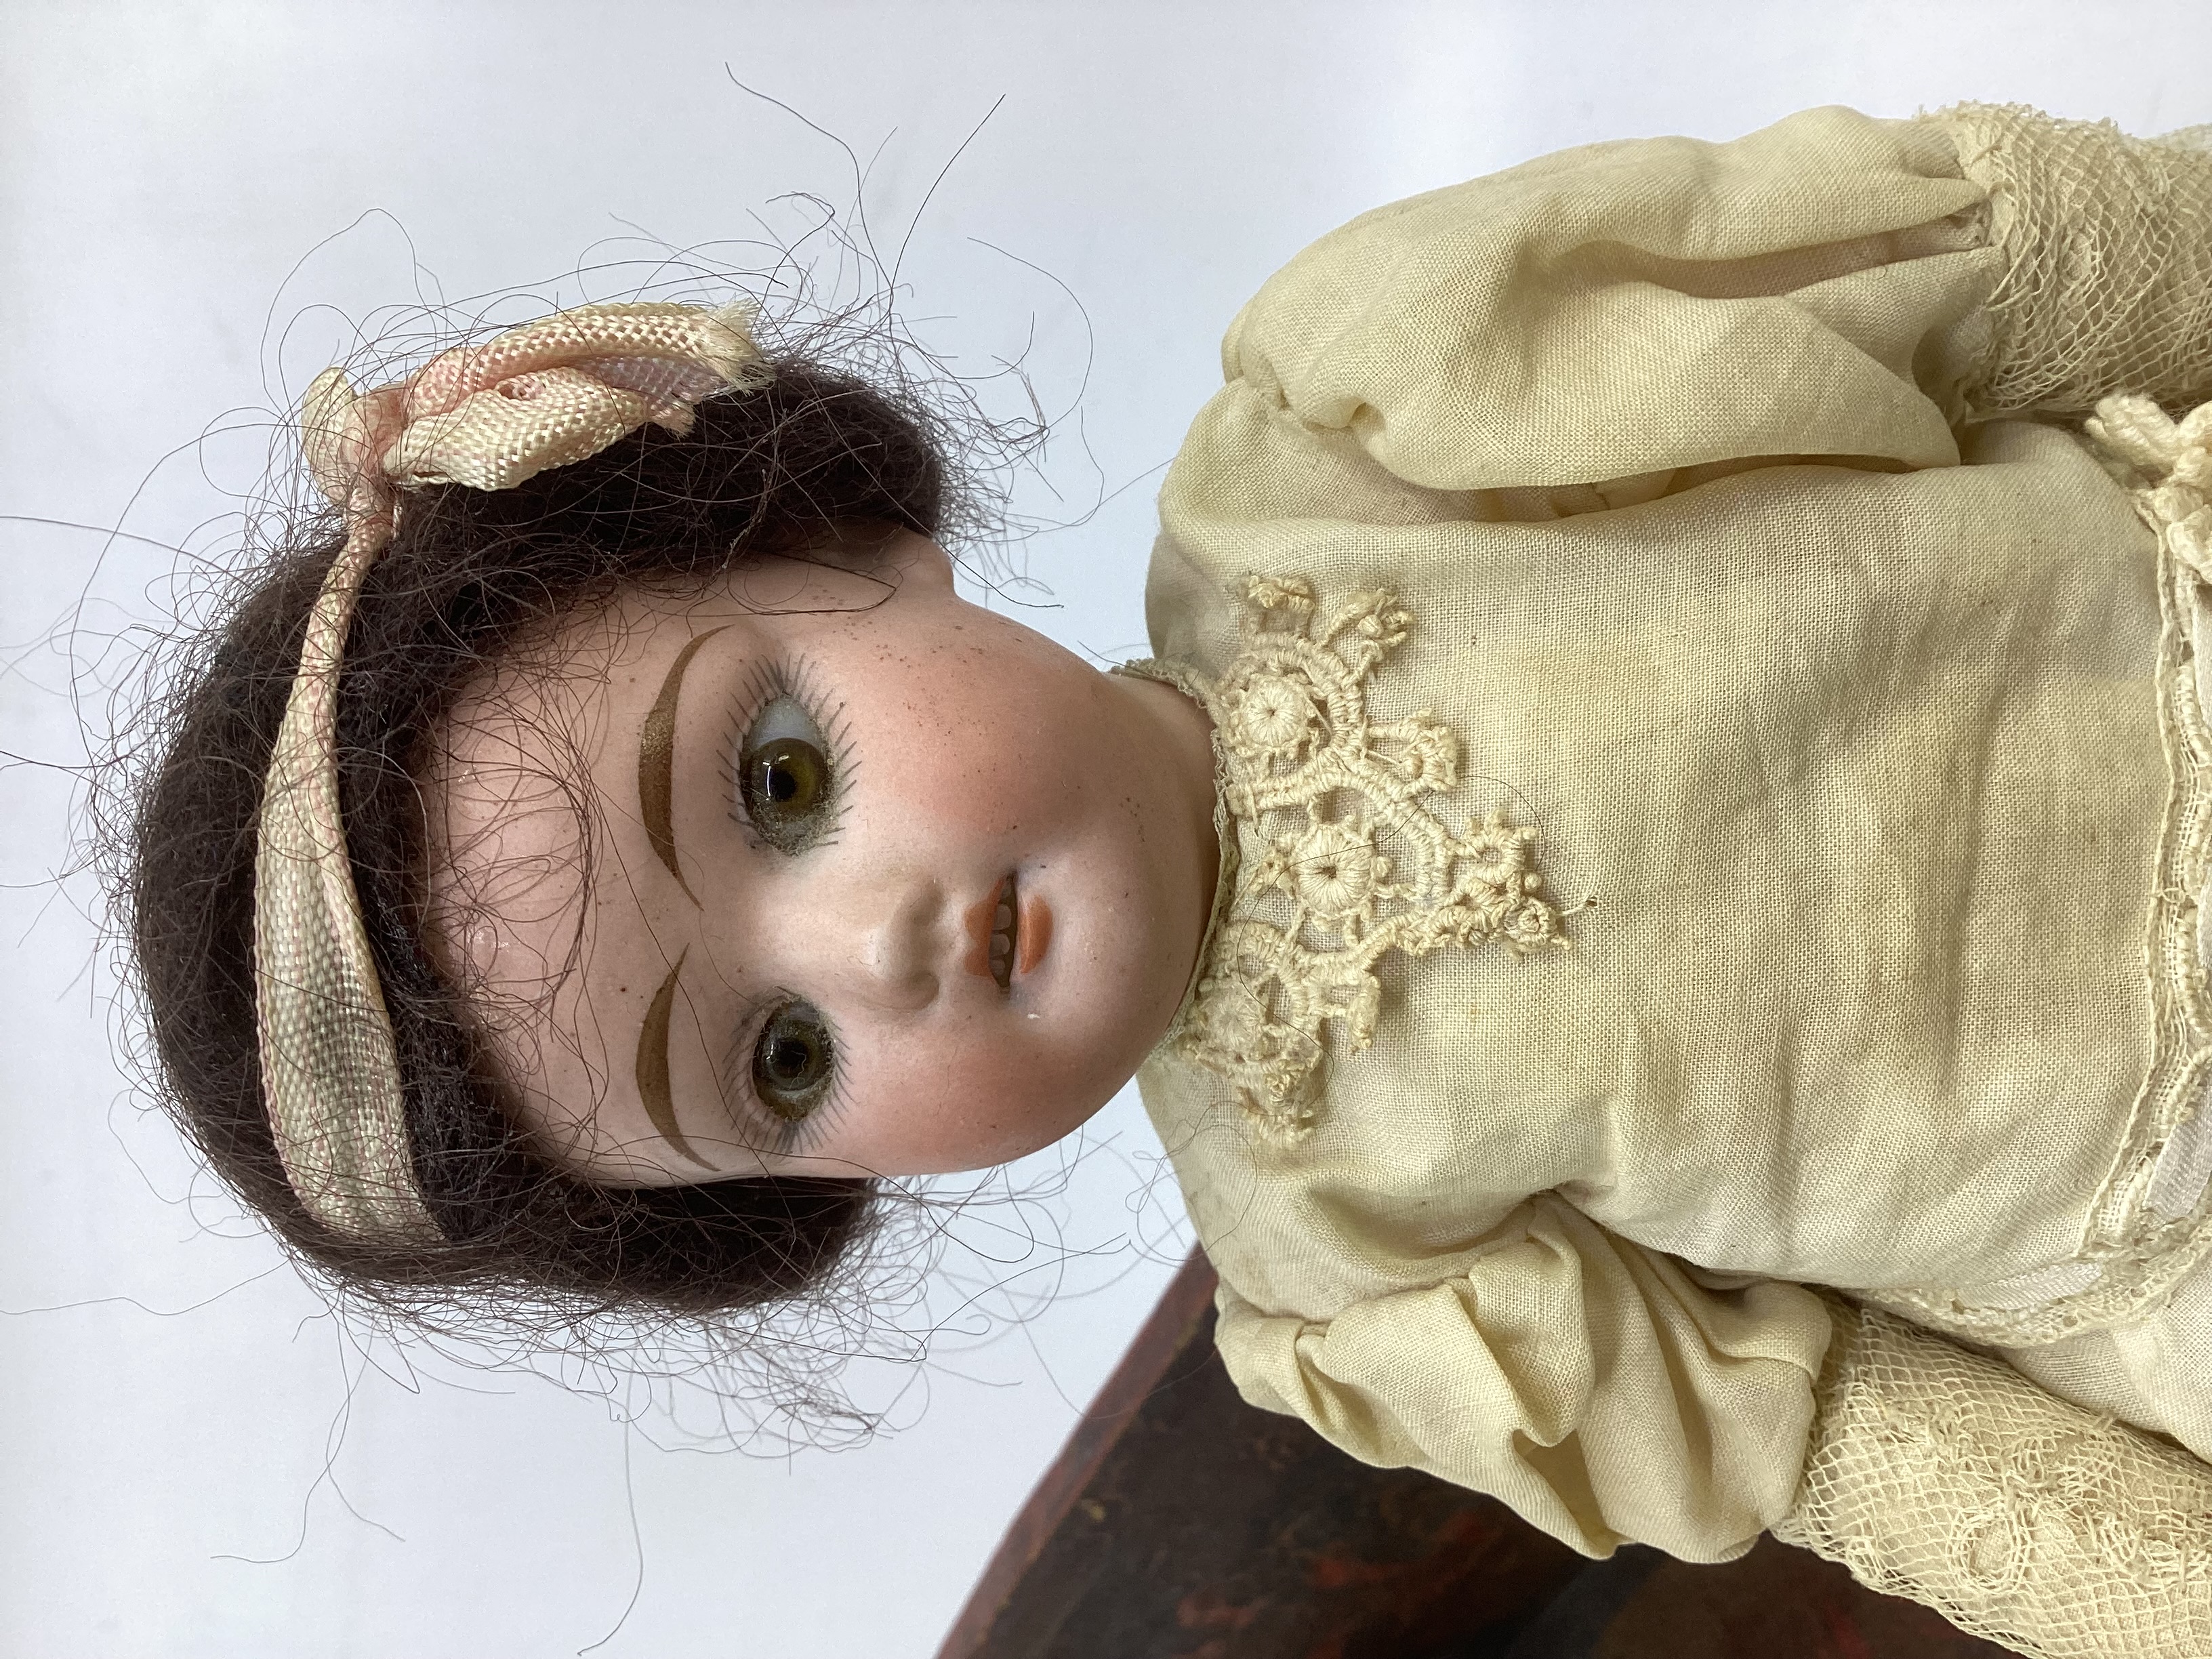 Antique German miniature 9” bisque head fully articulated doll with fixed glass eyes in antique - Image 2 of 4